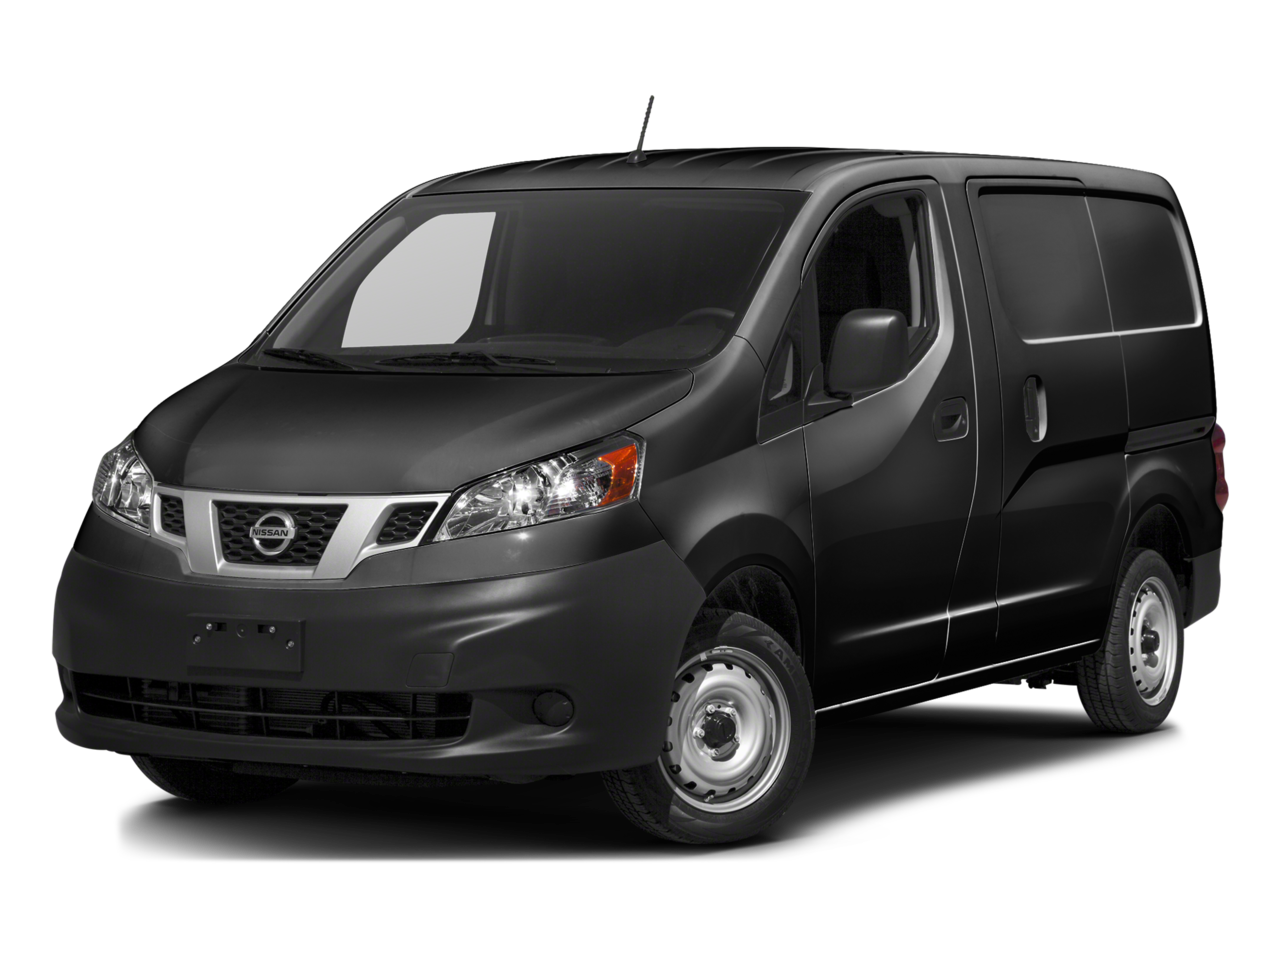 2016 Nissan NV200 Repair: Service and Maintenance Cost